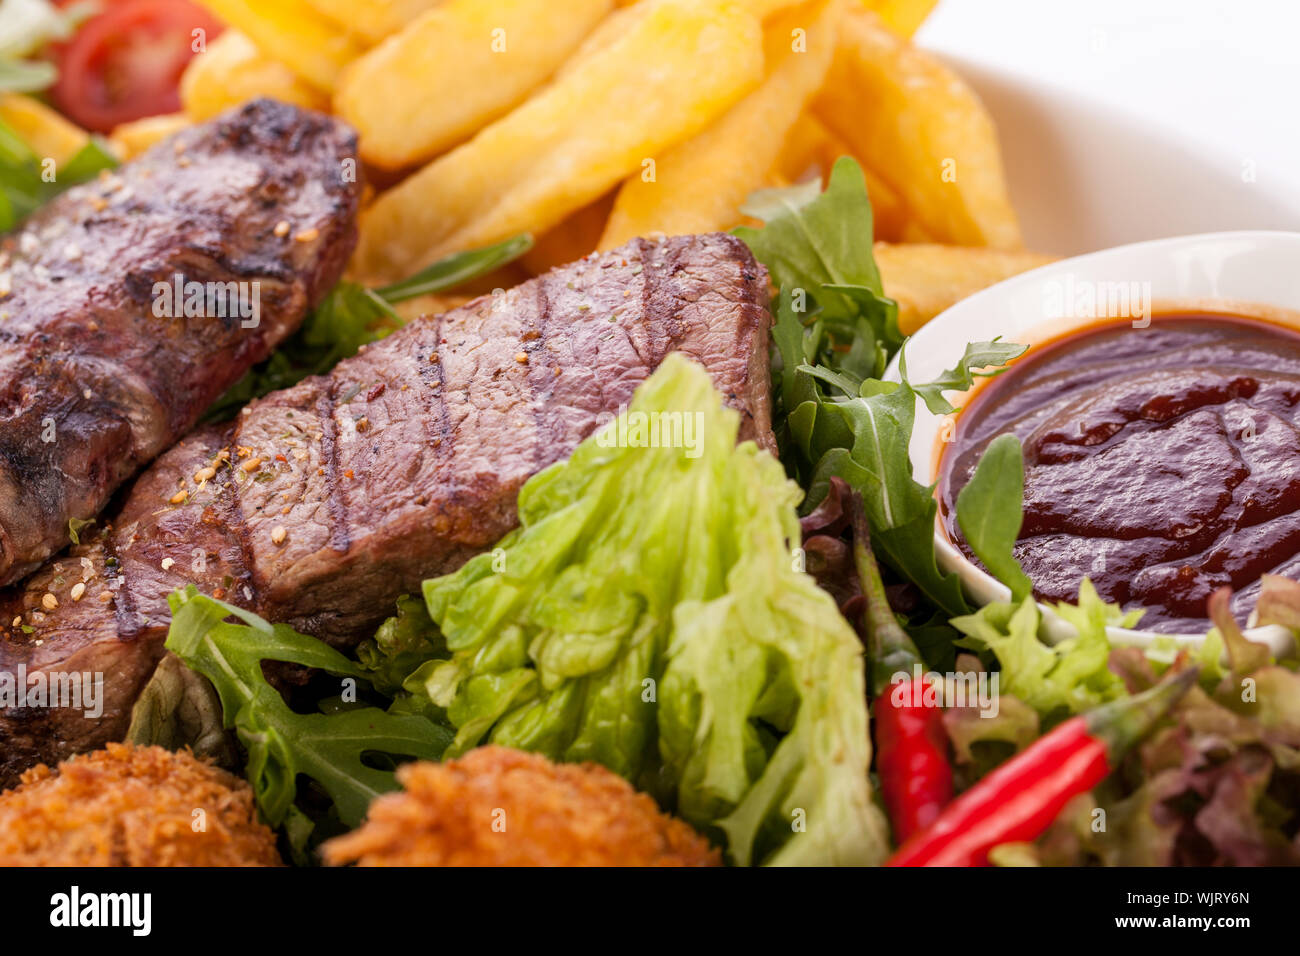 Wholesome platter of mixed meats including grilled steak, crispy crumbed chicken and beef on a bed of fresh leafy green mixed salad served with French Stock Photo